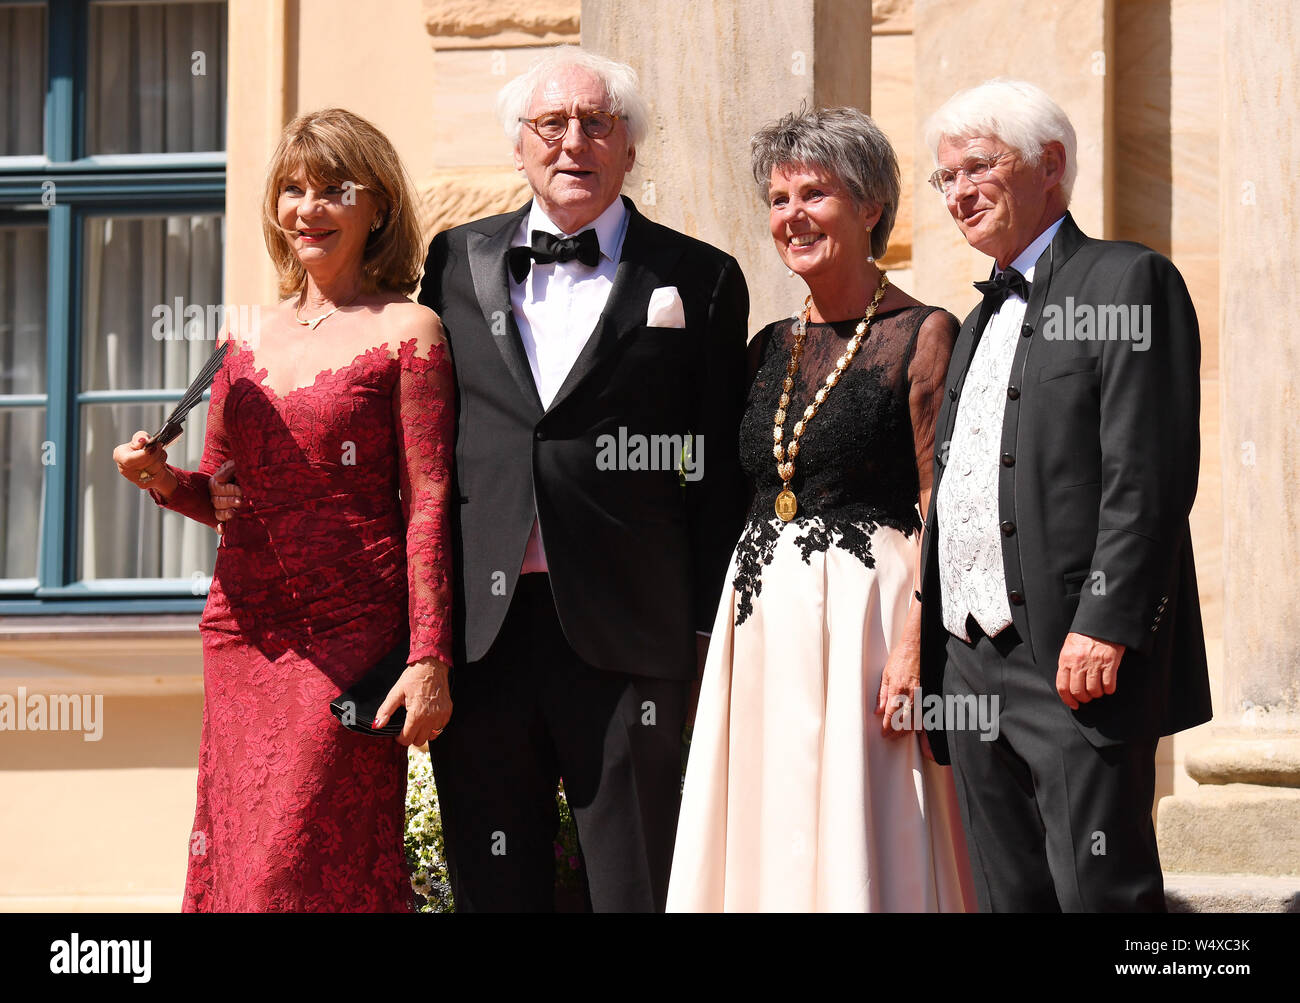 Bayreuth, Germany. 25th July, 2019. Actor Günther Maria-Halmer (2nd from left) arrives with his wife Claudia (l) at the beginning of the Bayreuth Festival 2019 and is welcomed by the Lord Mayor of Bayreuth Brigitte Merk-Erbe and her husband Thomas (r). The Richard Wagner Festival begins in Bayreuth on Thursday. Numerous celebrities walked the red carpet. (To dpa 'Bayreuth Festival start in heat with new 'Tannhäuser'') Credit: Tobias Hase/dpa/Alamy Live News Stock Photo